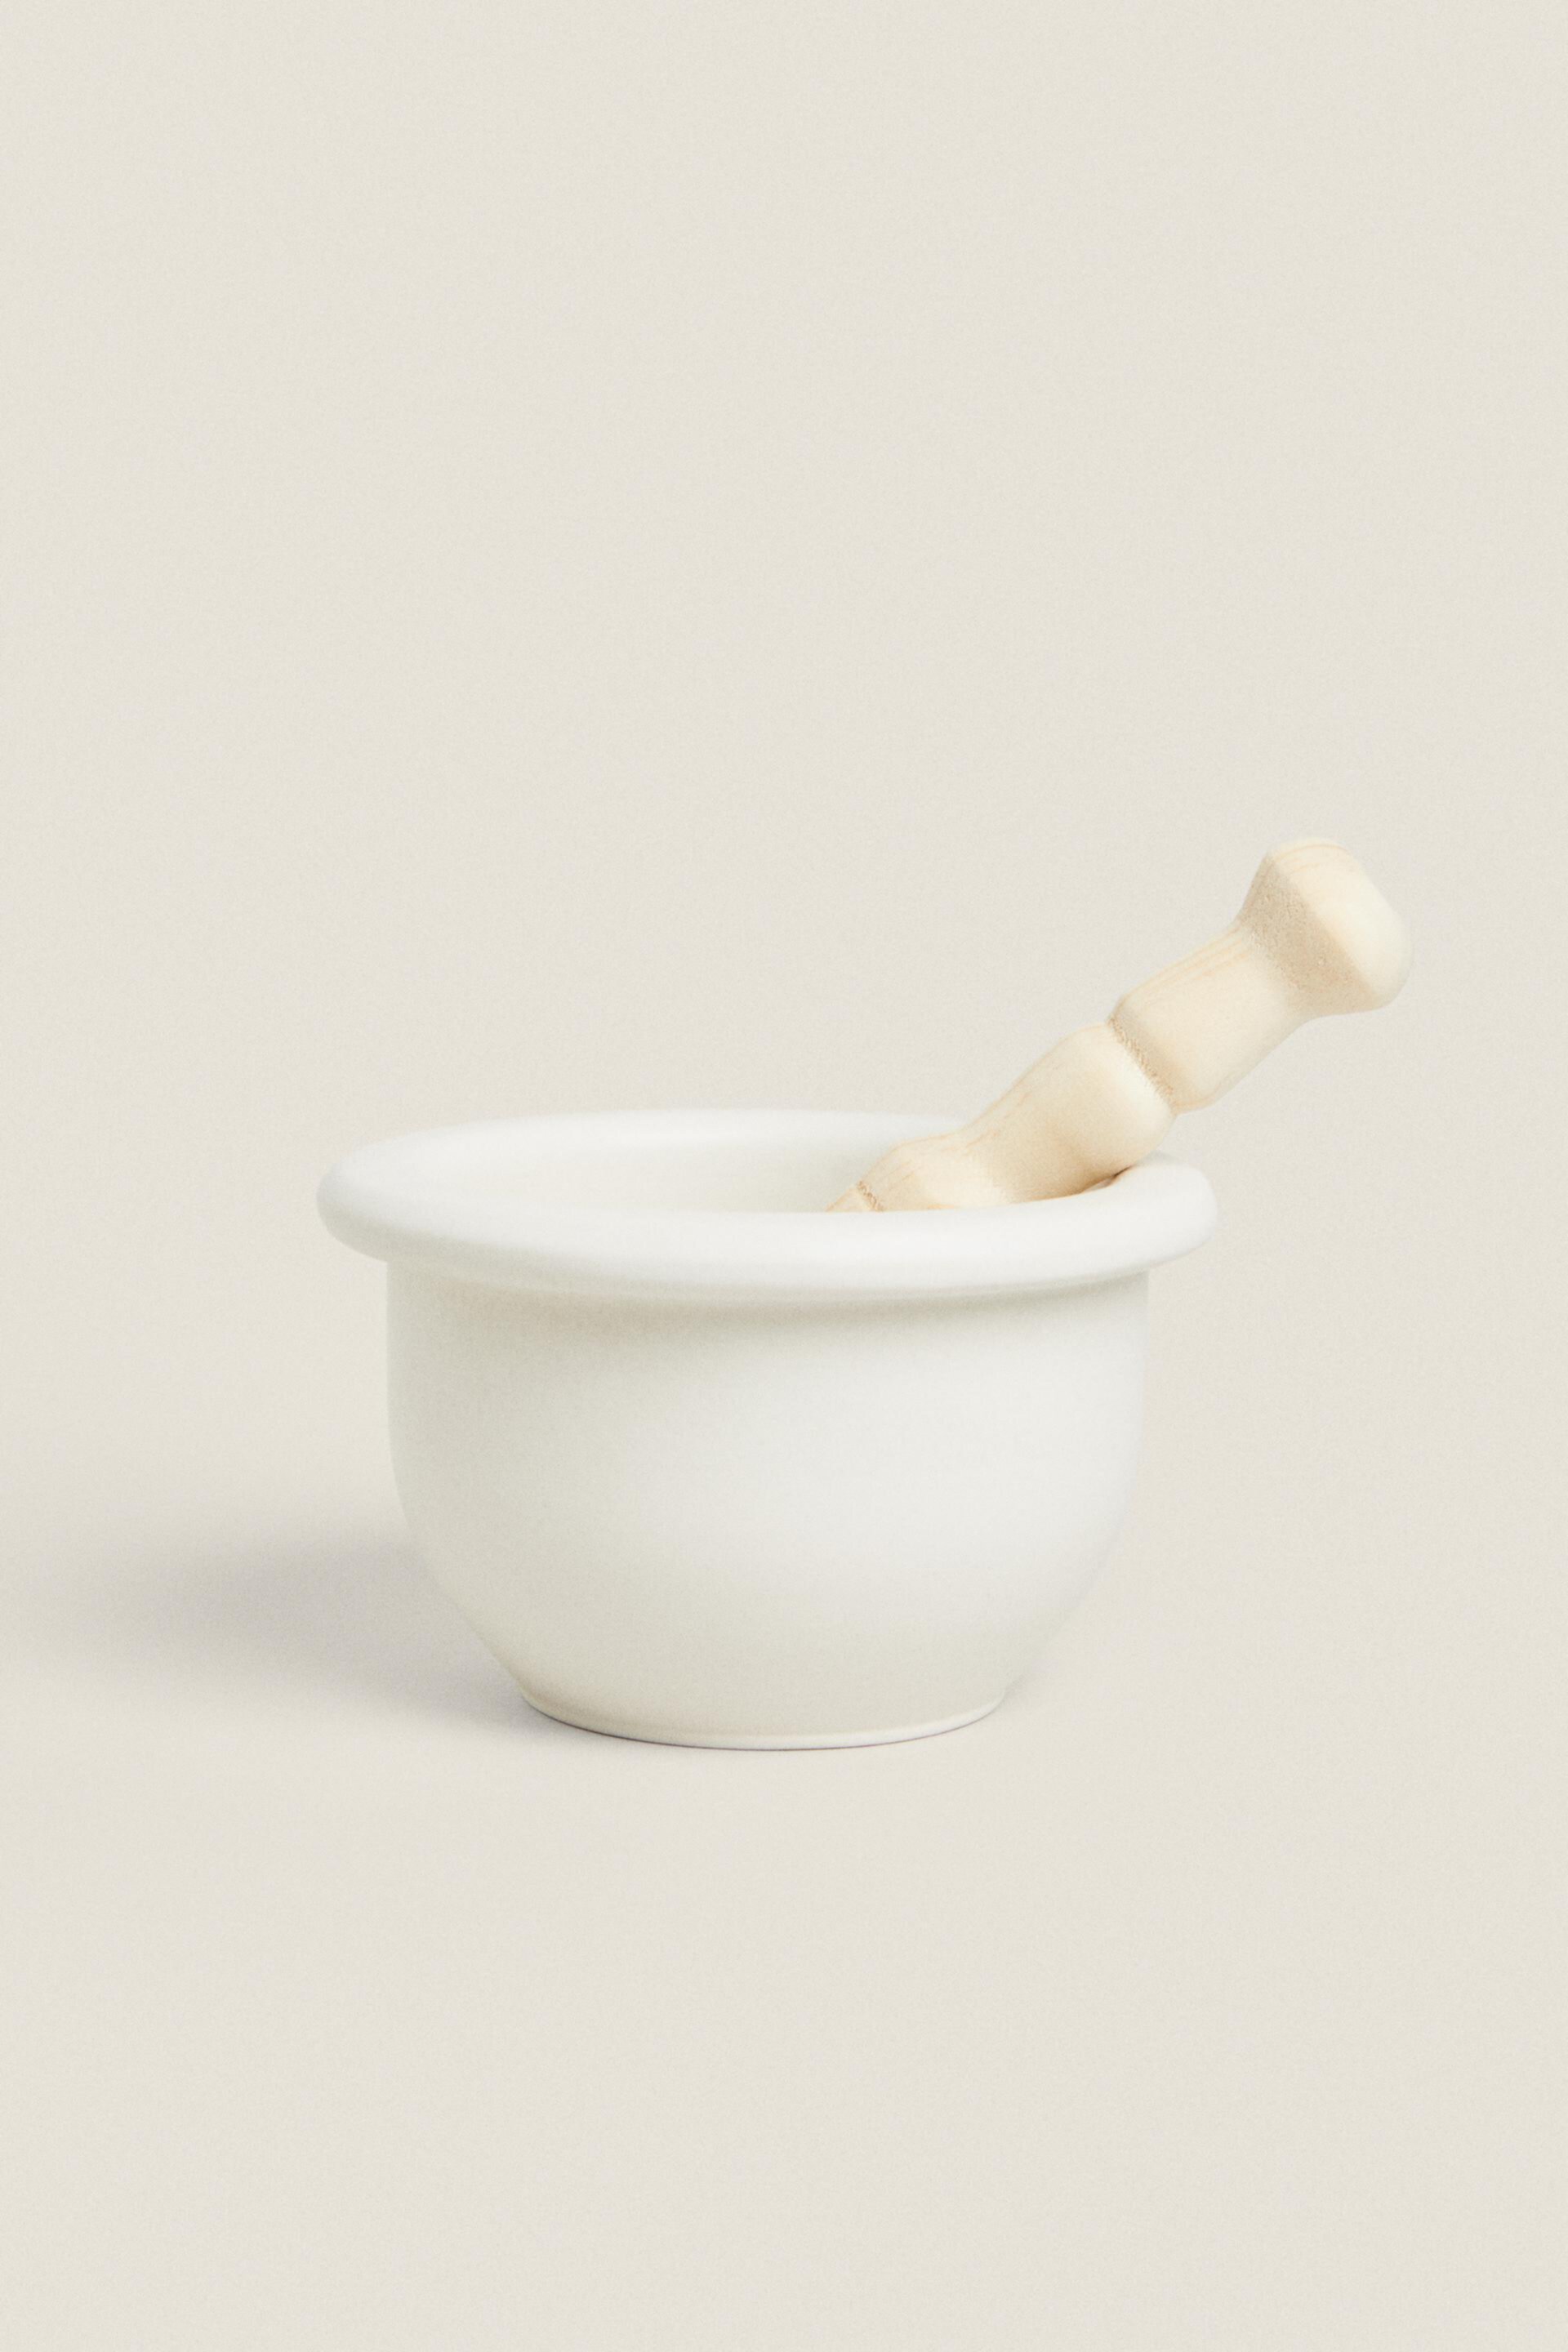 CERAMIC PESTLE AND MORTAR WITH WOODEN HANDLE ZARA